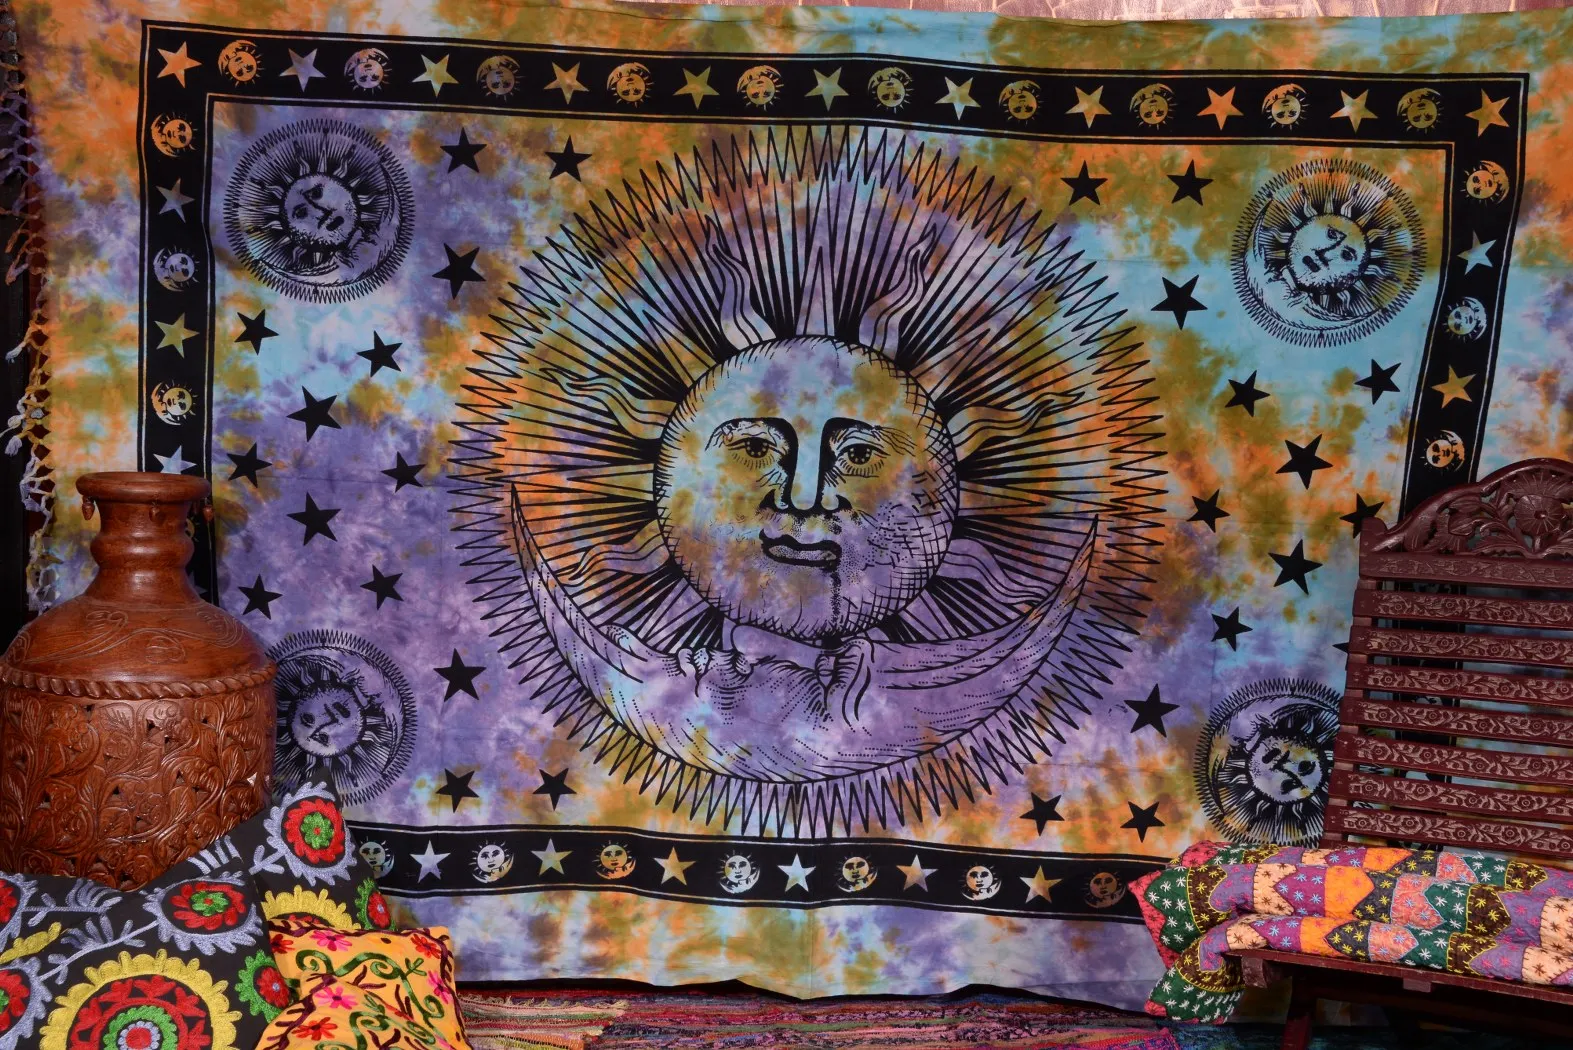 Psychedelic Sun Moon Tapestry Bohemian Wall Tapestry Indian Wall Hanging Home Decor Buy Moon And Stars Wall Decoration Hanging Sun Face Wall Decoration Ethnic Indian Wall Decor Product On Alibaba Com